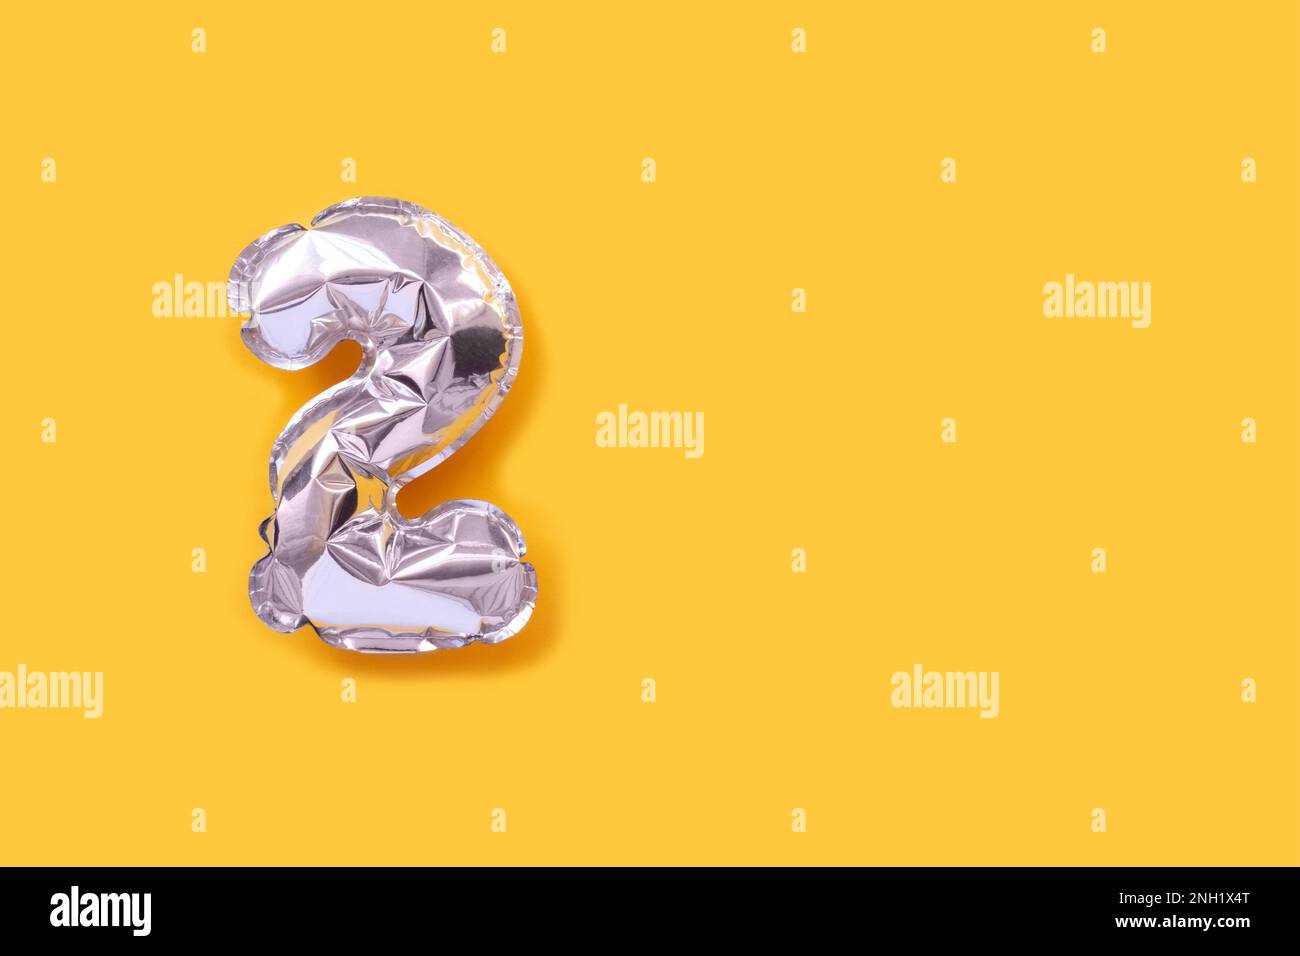 Number 2 silver balloons. Minimalistic composition with copy space on a yellow background. Stock Photo